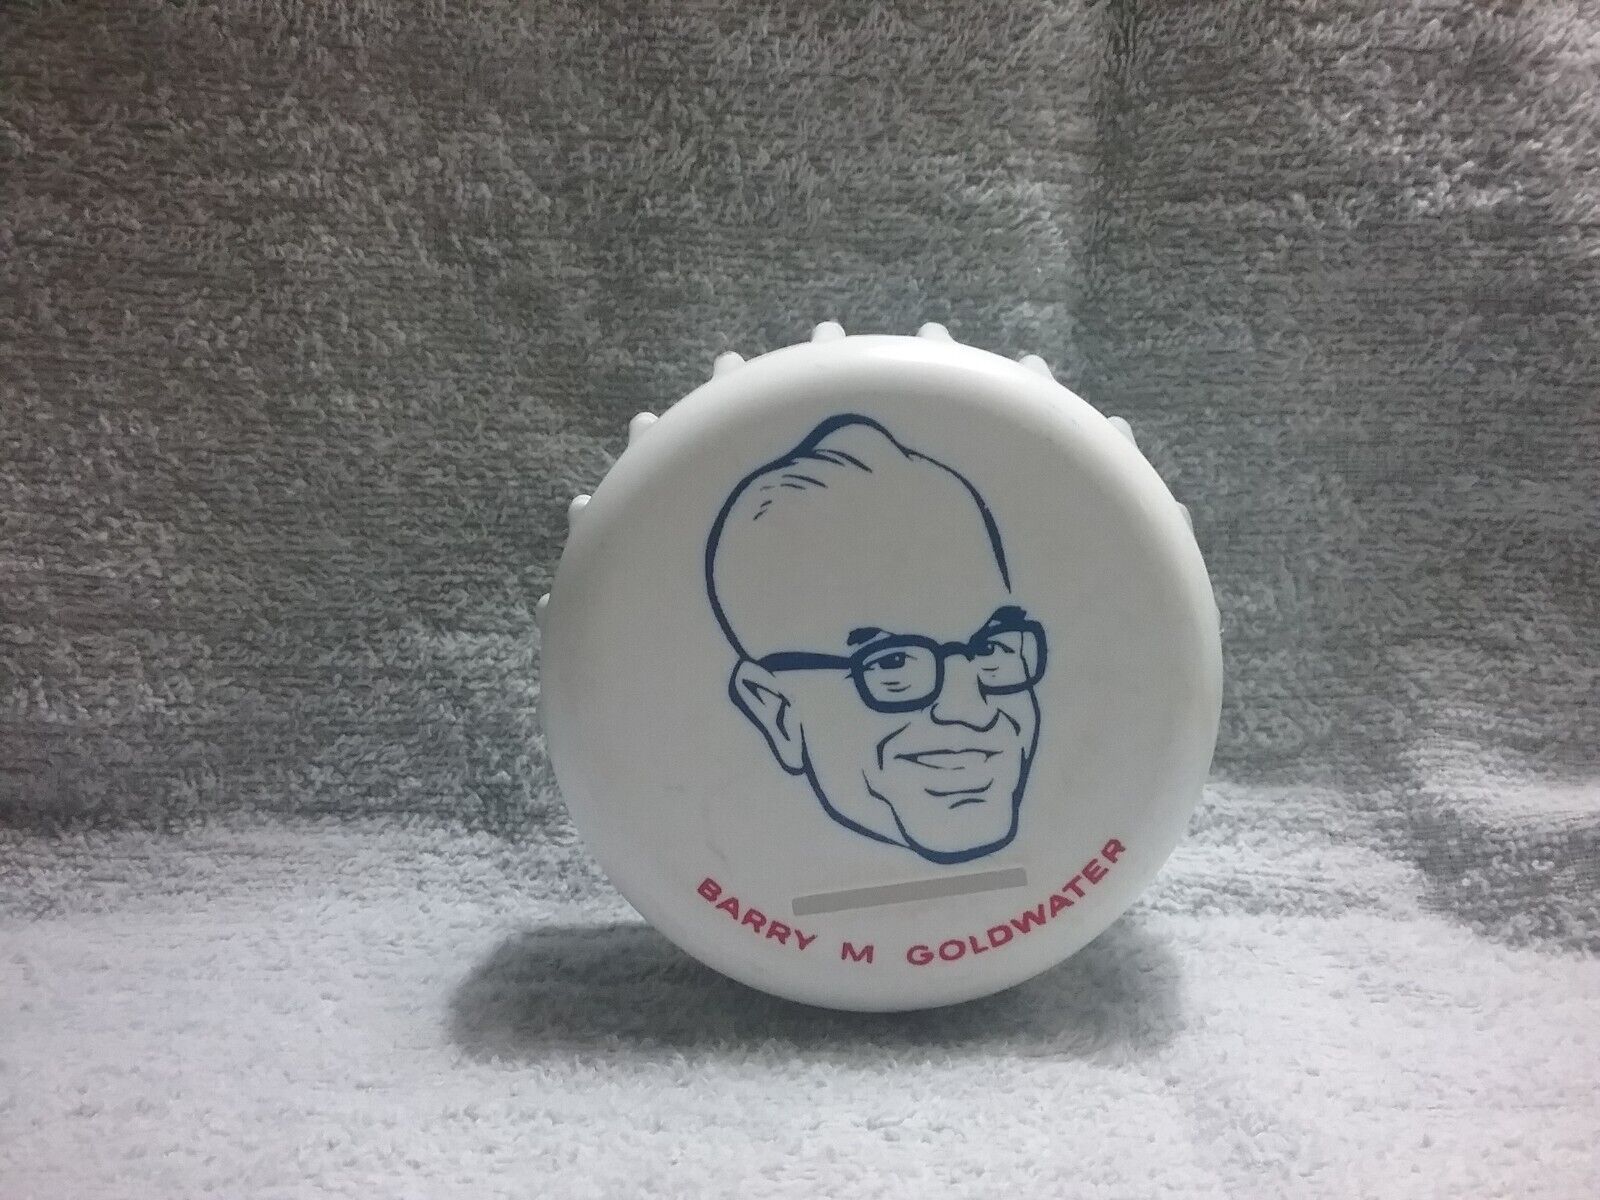 Barry Goldwater 1964 3-D bank campaign political